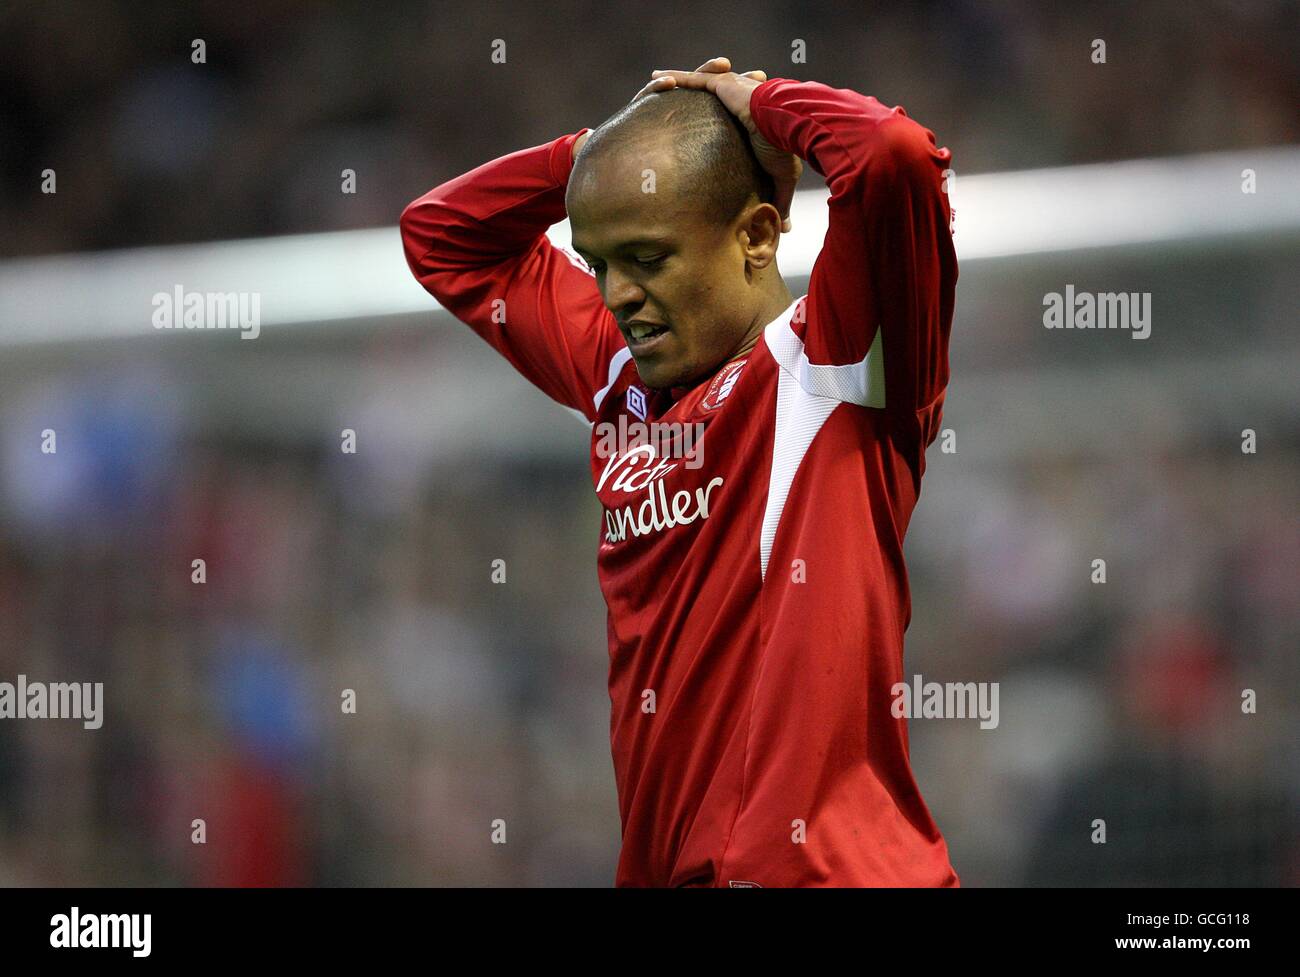 Soccer - Coca-Cola Football League Championship - Play Off Semi Final - Second Leg - Nottingham Forest v Blackpool - City Ground. Nottingham Forest's Robert Earnshaw shows his dejection after his effort is ruled out for offside Stock Photo